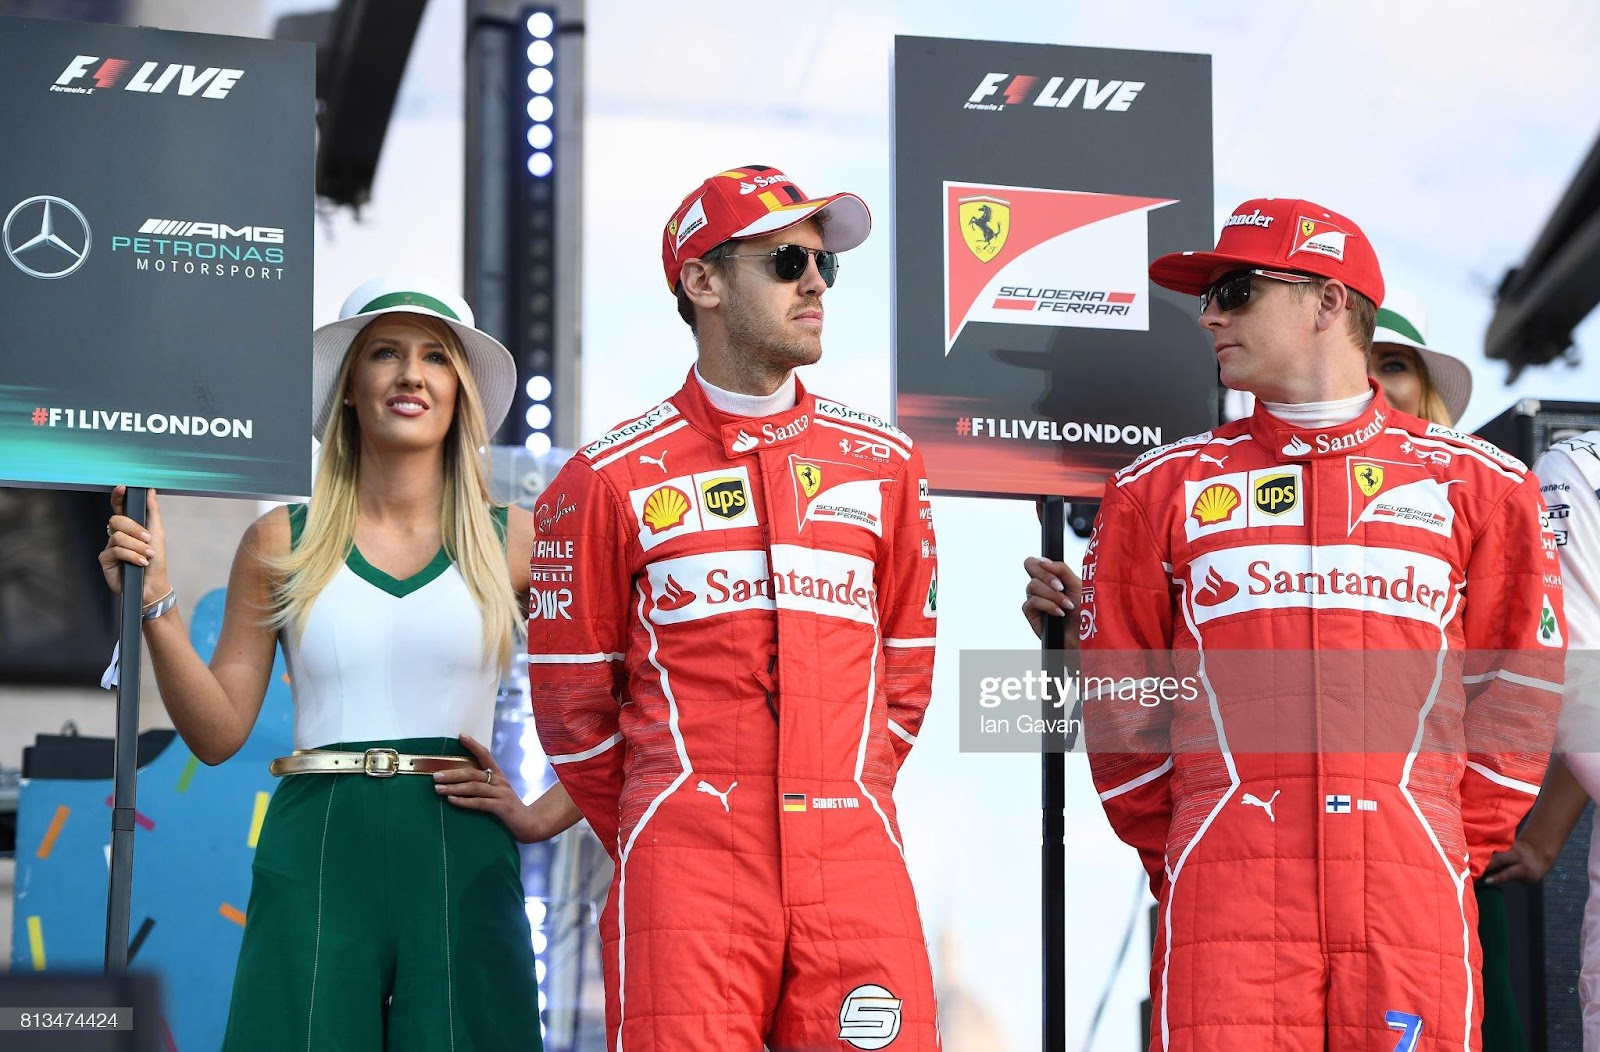 Sebastian Vettel and Kimi Raikkonen on stage at the F1 Live in London event at Trafalgar Square on July 12, 2017 in London, England.